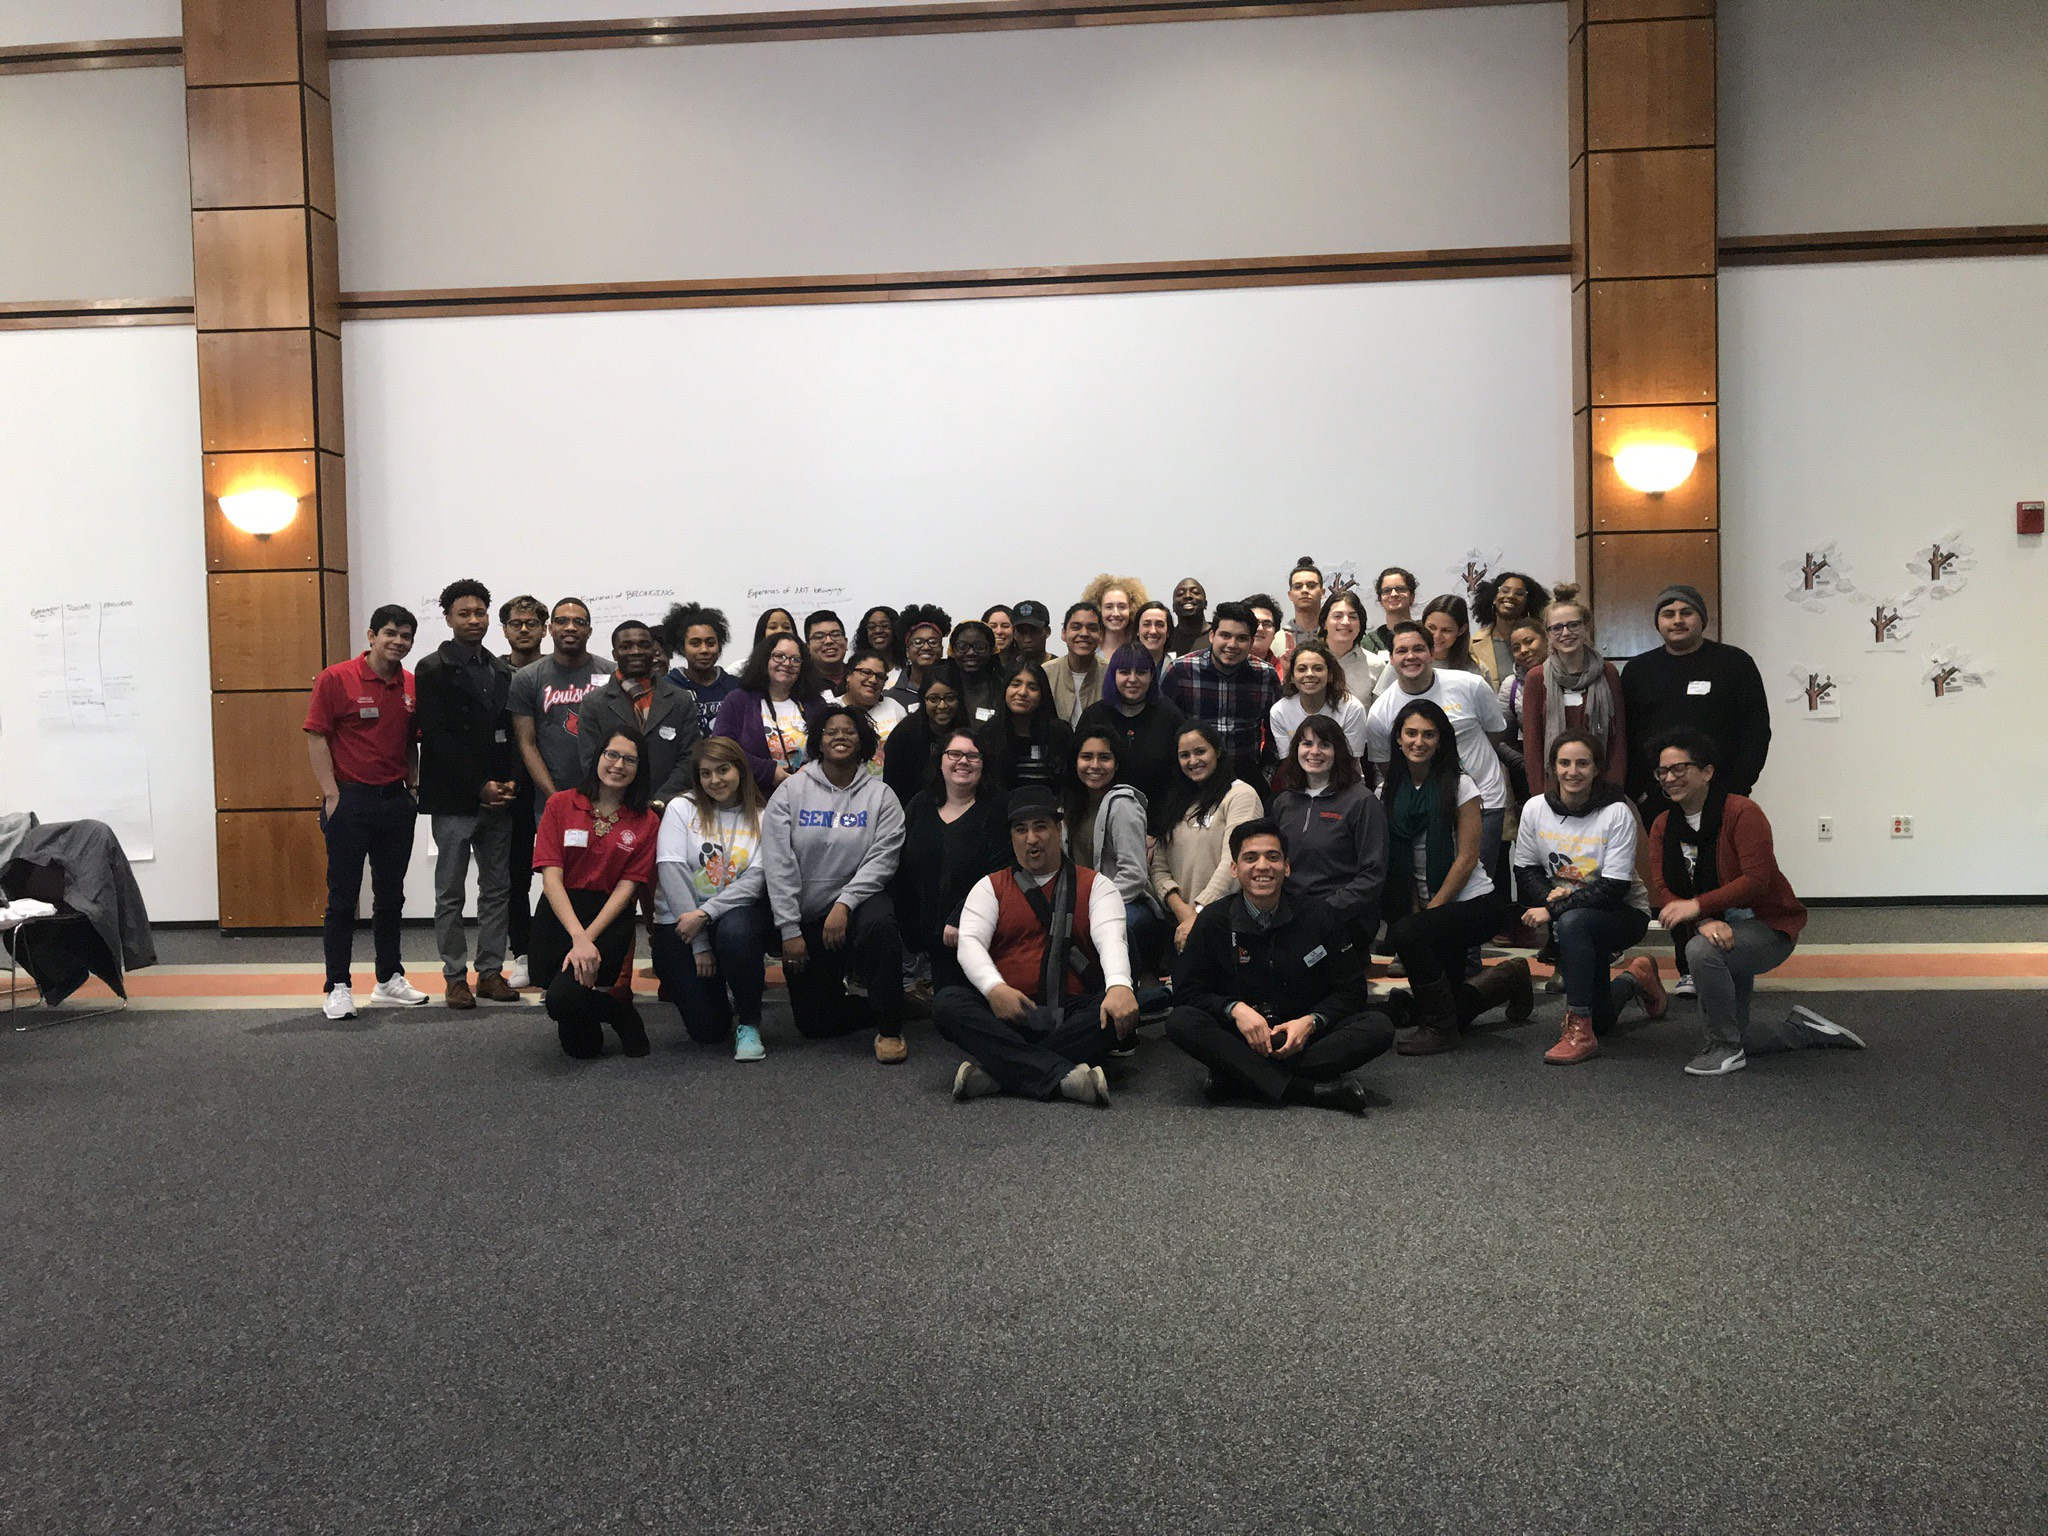 Last year's Conocimiento, or cultural training, group. The Cultural Center program will be held again in the spring, its fifth time on UofL's campus.